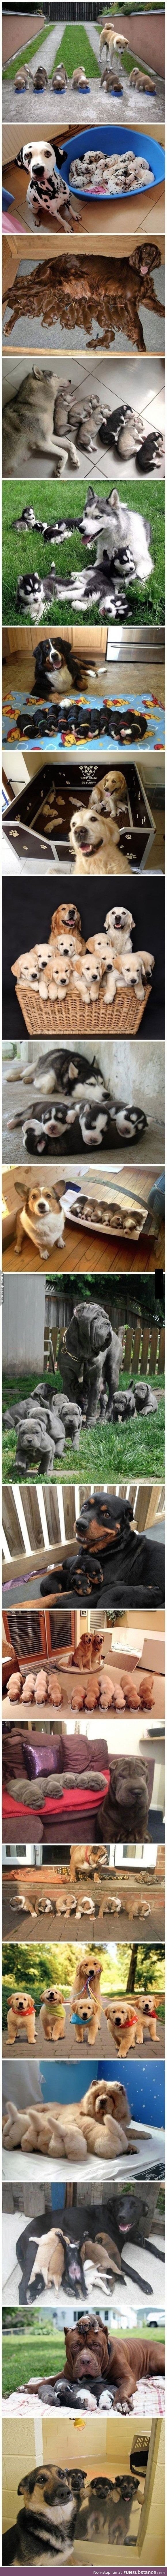 Doggos and their puppers